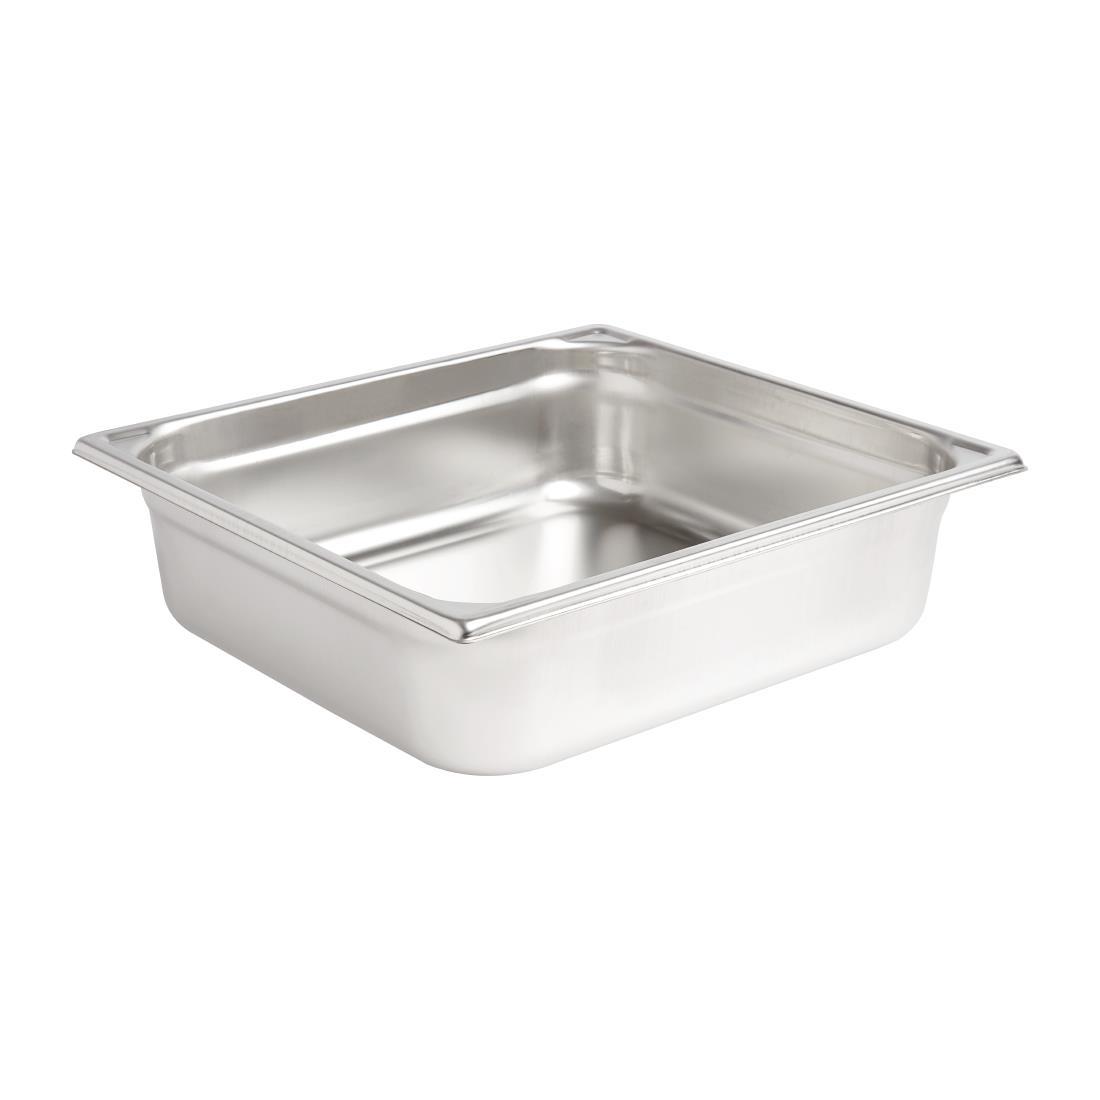 Matfer Bourgeat Stainless Steel 2/3 Gastronorm Pan 100mm - K054  - 1